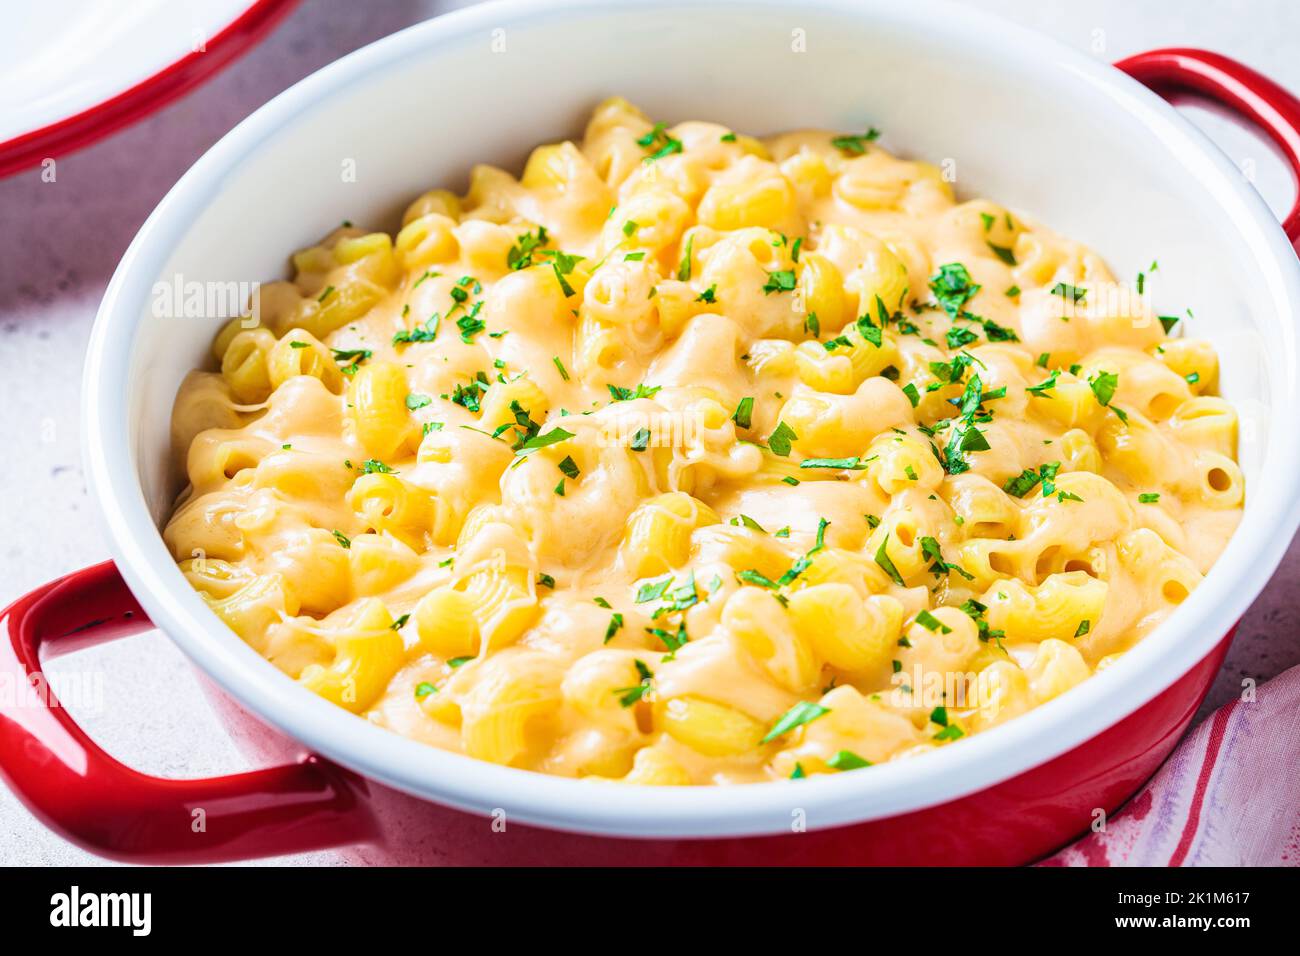 Mac and cheese in red pot, close-up. Traditional American food. Stock Photo